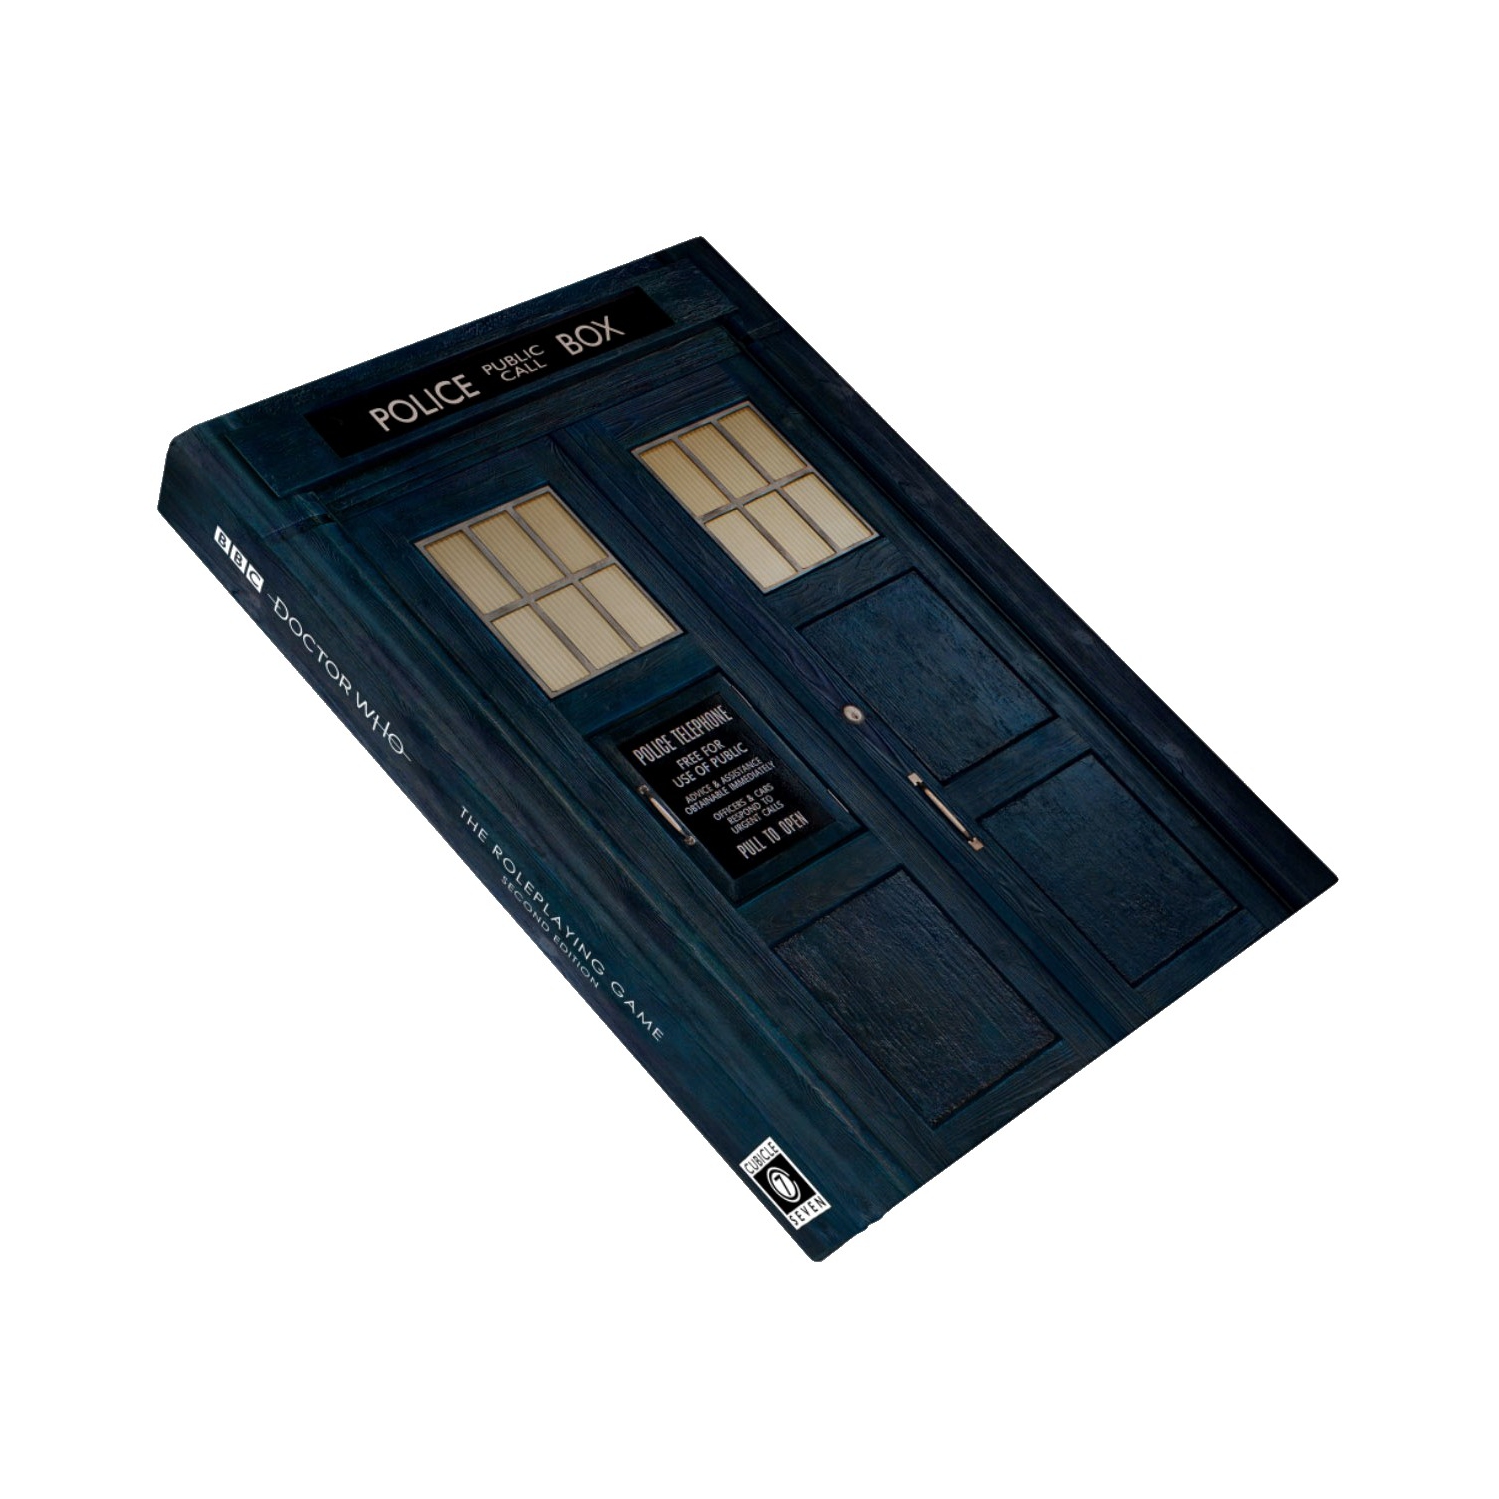 Cubicle 7 Entertainment Doctor Who: The Roleplaying Game Collector's Edition (Second Edition) Hard Cover Book